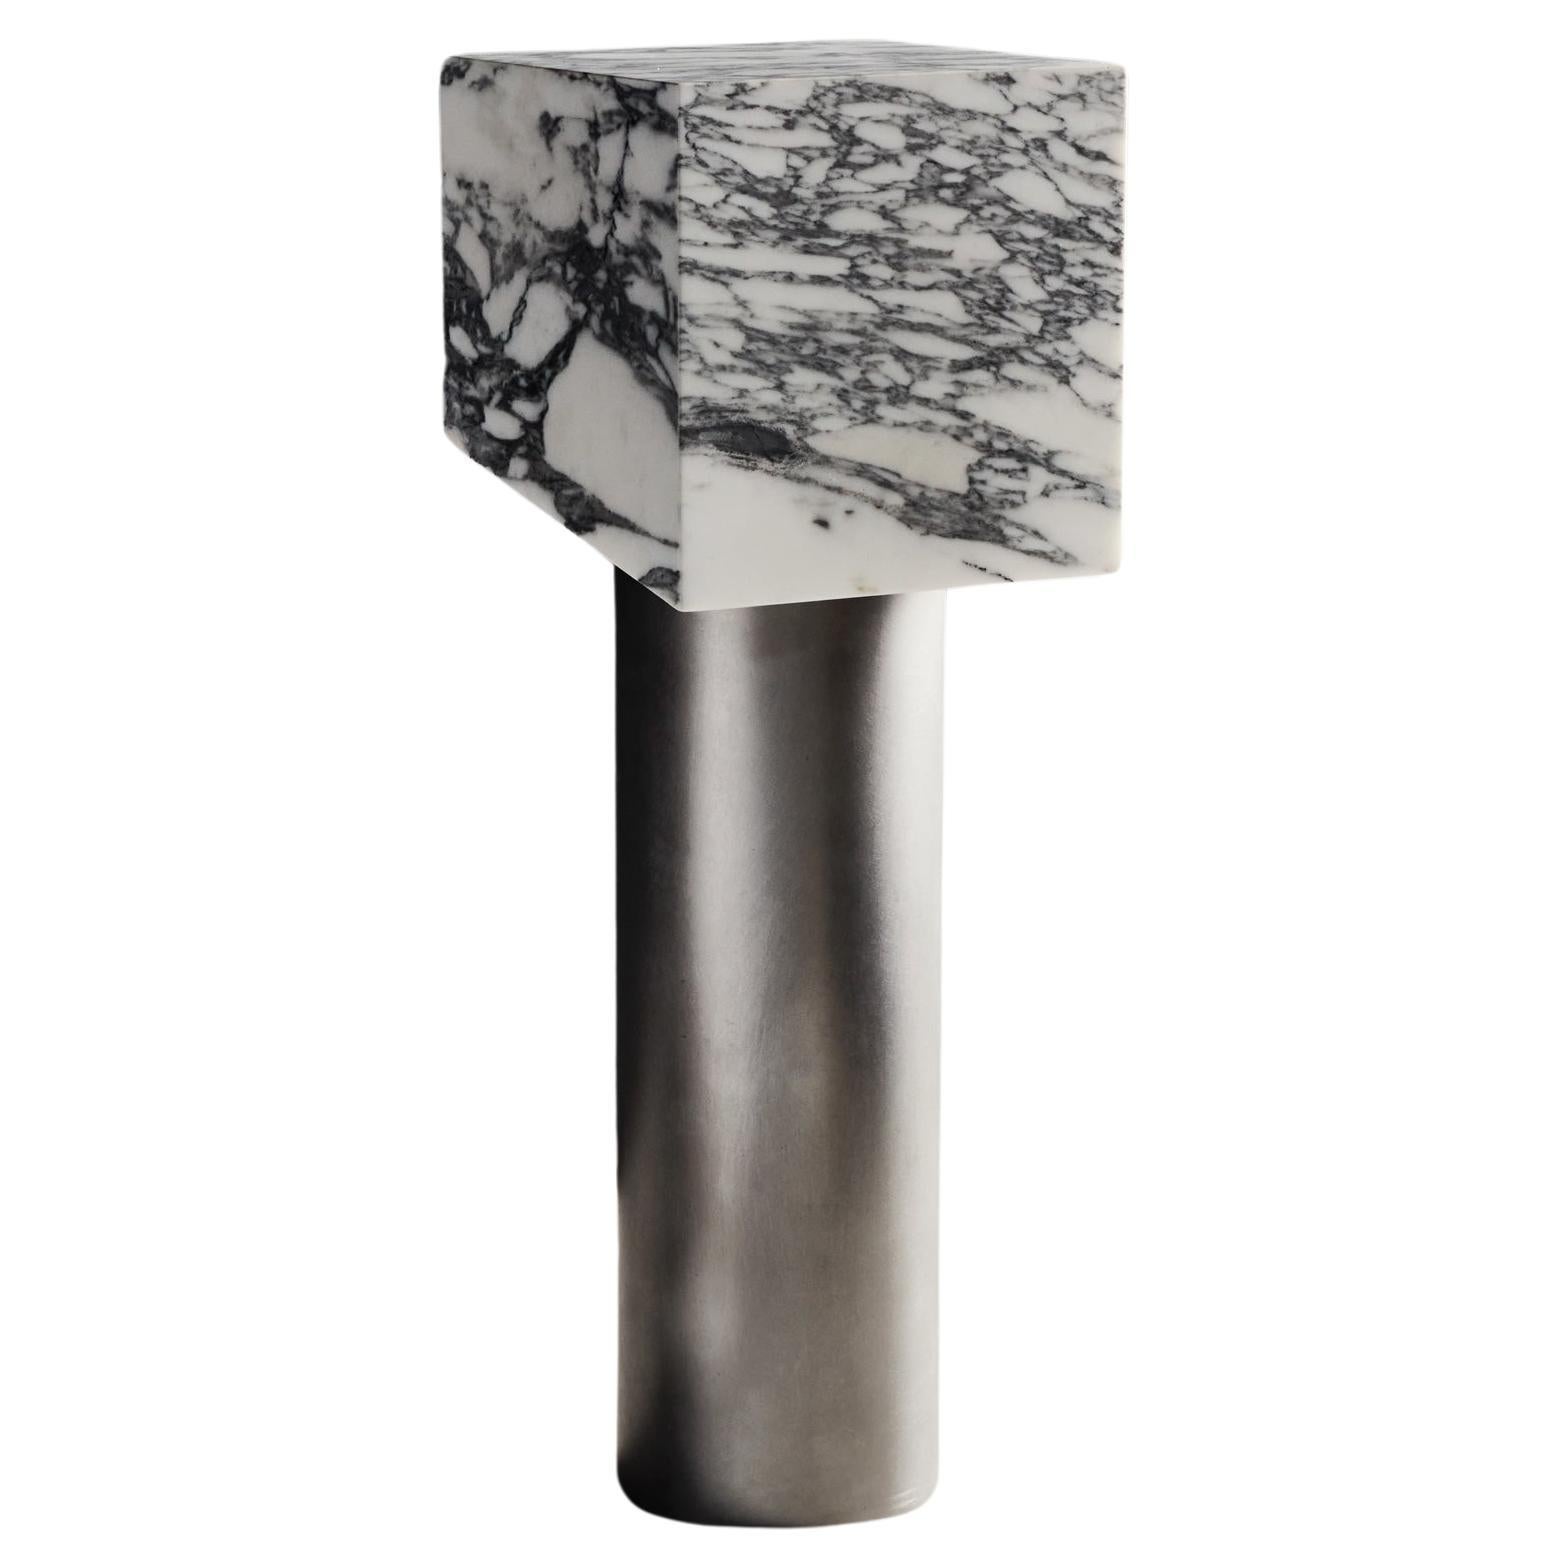 Marble and Brushed Aluminum or Brass Table Lamp by Arielle Assouline-Lichten